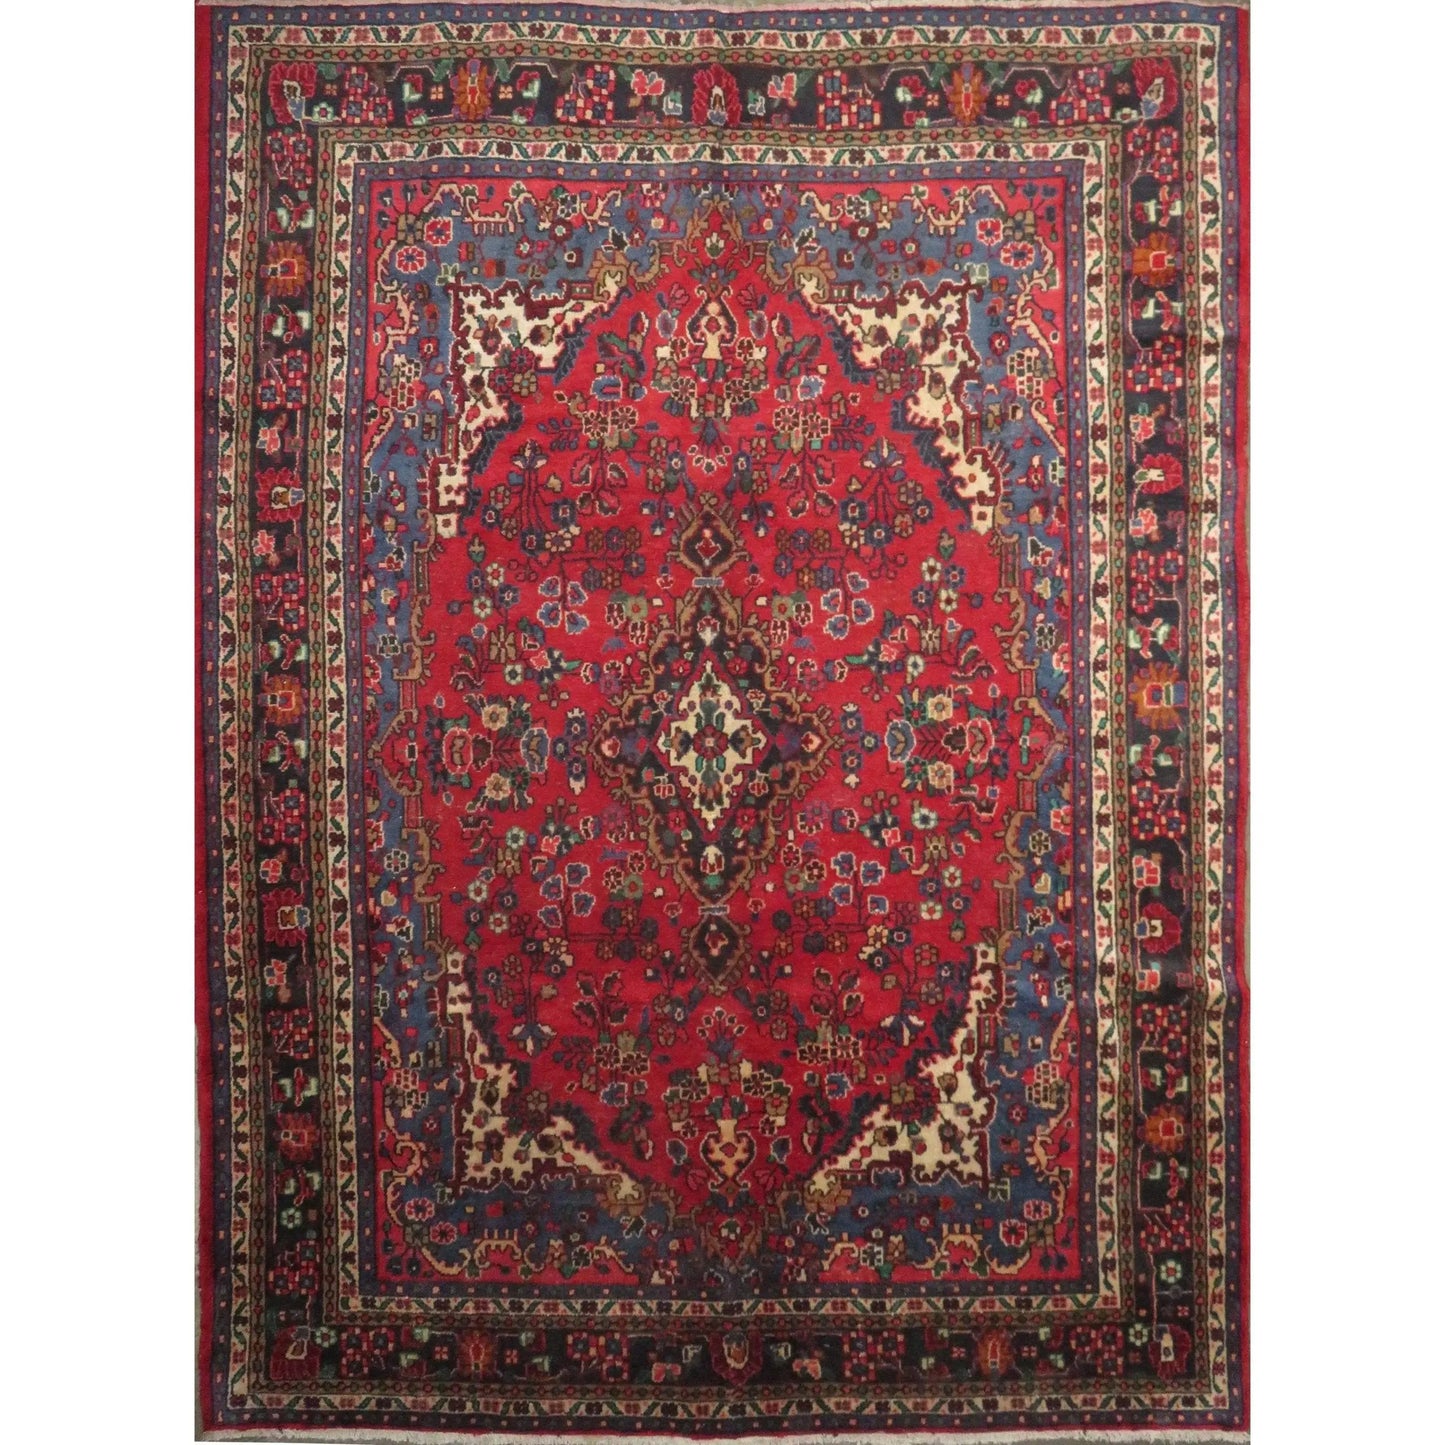 Hand-Knotted Persian Wool Rug _ Luxurious Vintage Design, 11'10" x 8'8", Artisan Crafted